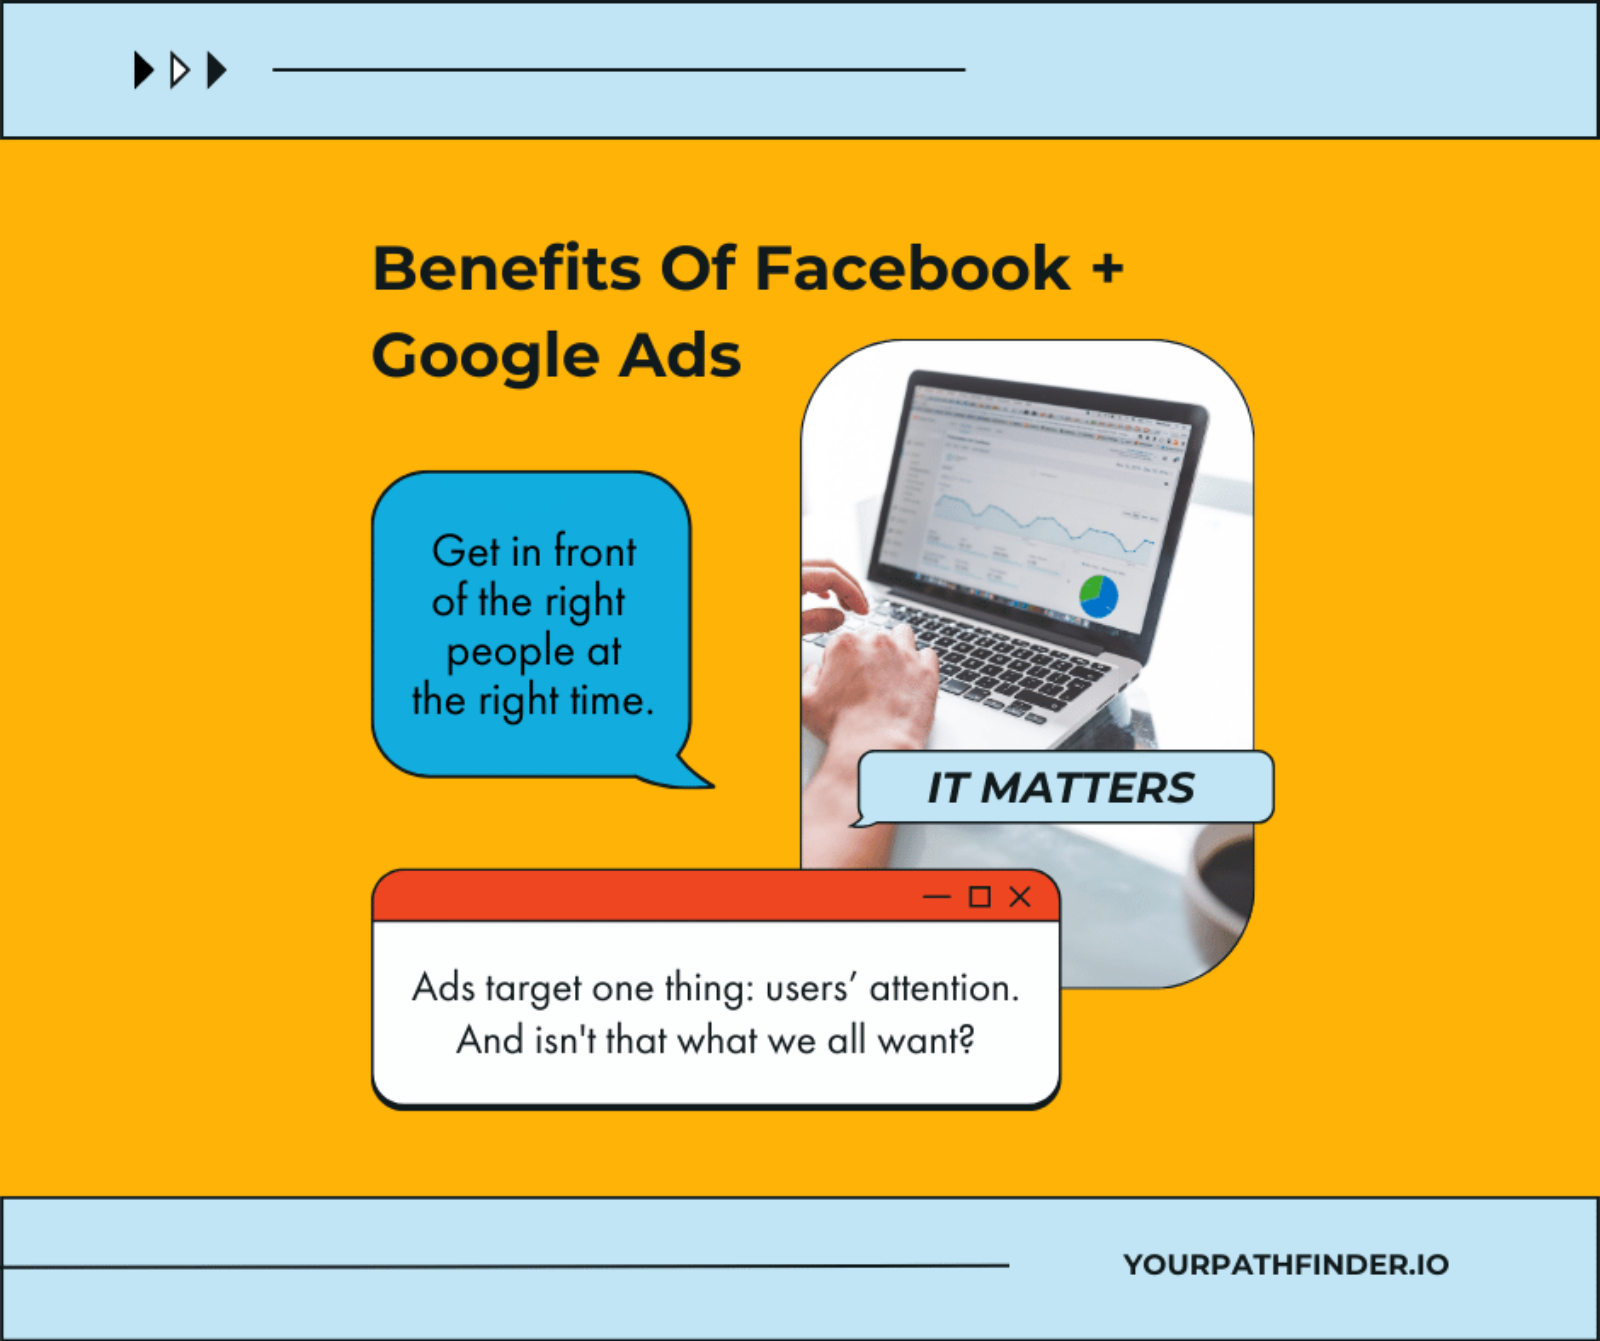 Benefits Of Facebook + Google Paid Ads